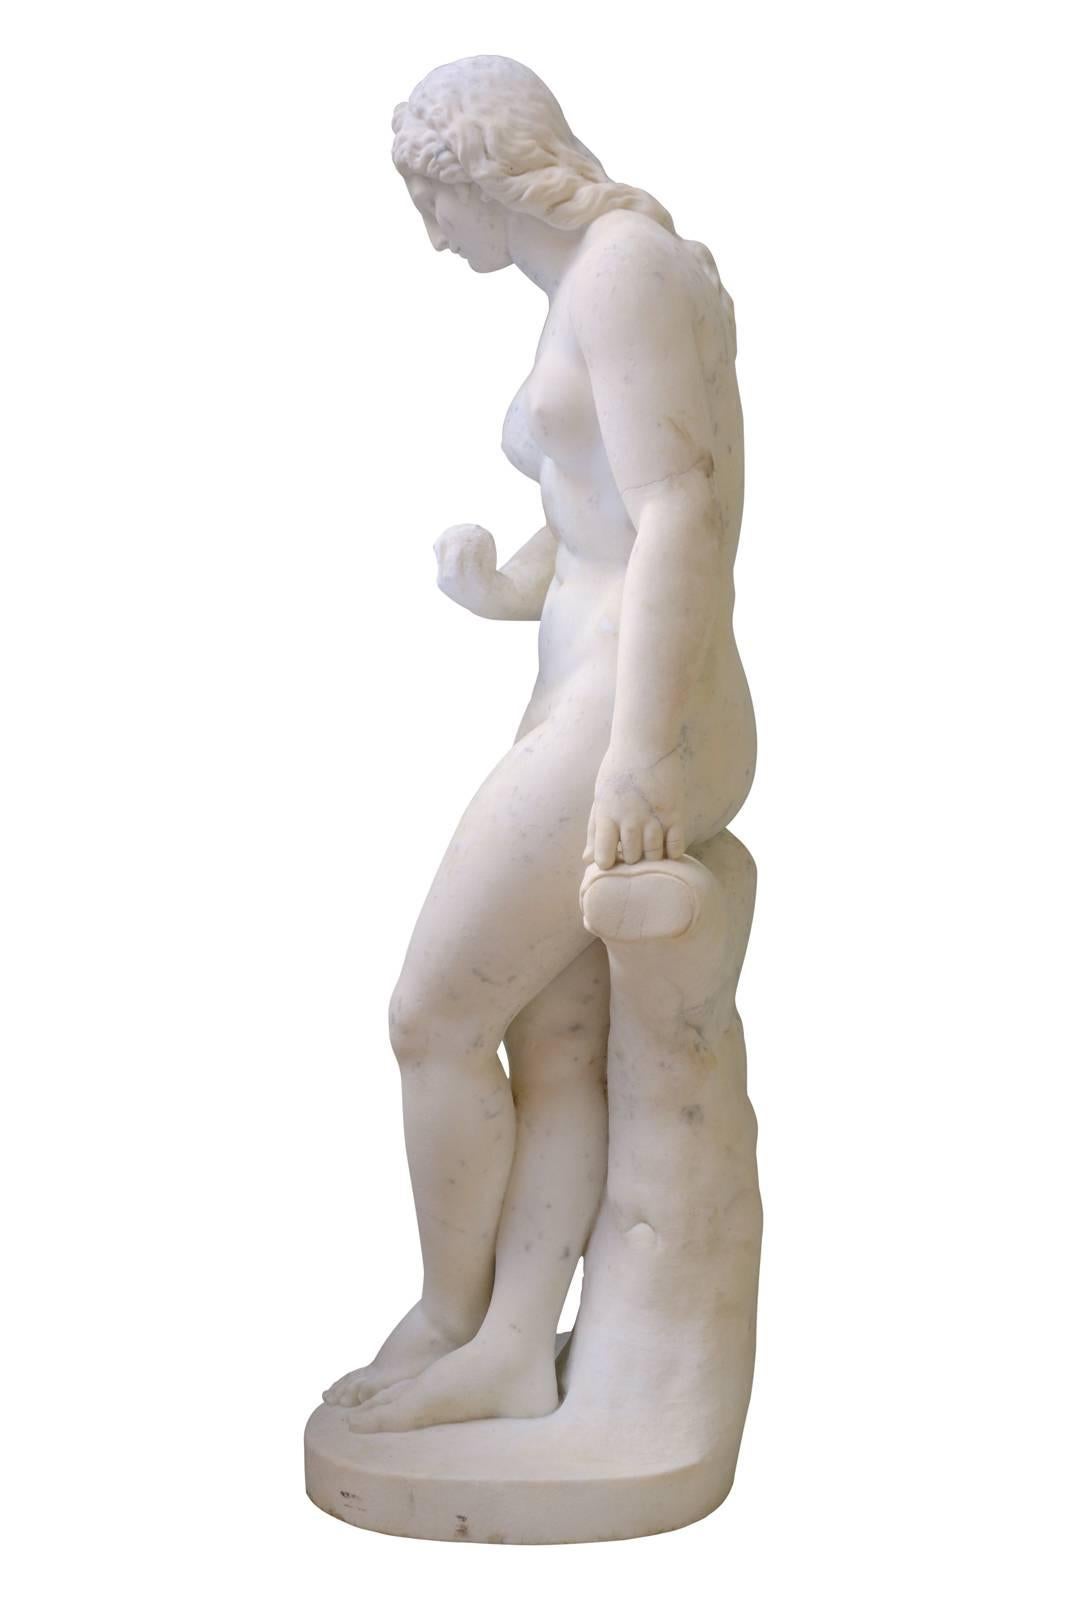 Louis XVI Important Carrara Marble Statue of Venus with Apple, 18th Century For Sale